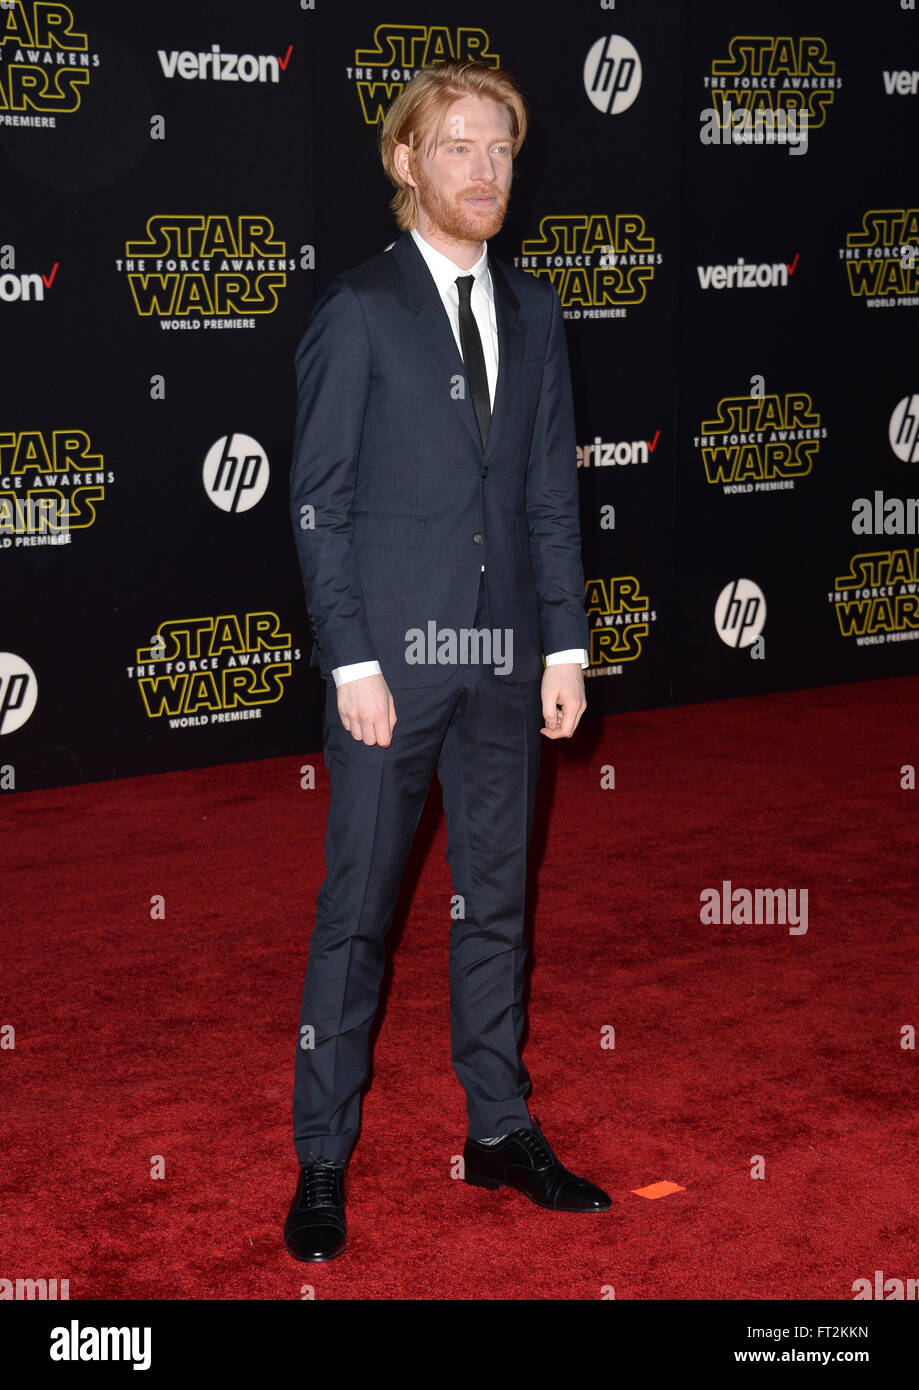 LOS ANGELES, CA - DECEMBER 14, 2015: Actor Domnhall Gleeson at the world premiere of 'Star Wars: The Force Awakens' on Hollywood Boulevard Stock Photo